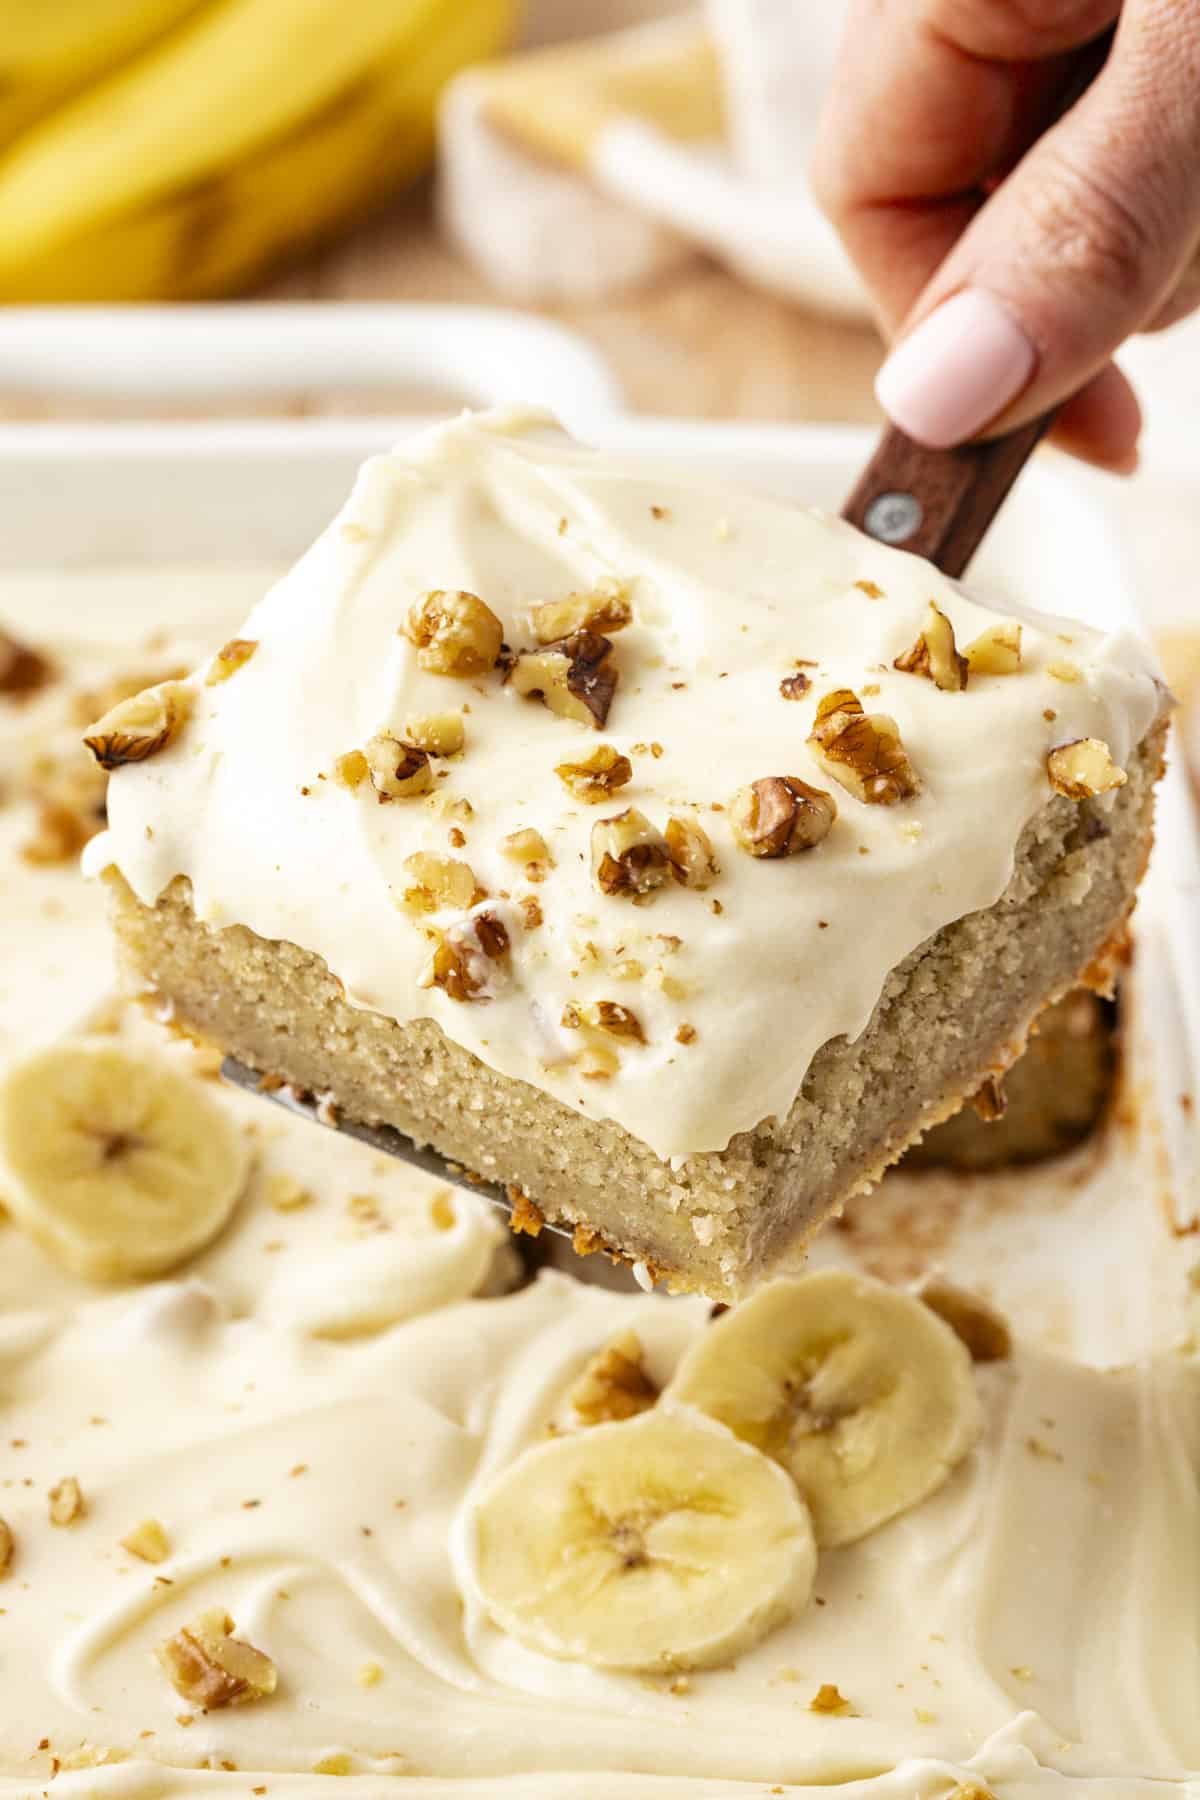 a slice of banana cake with chopped walnuts sprinkled on top of it being lifted out of the cake dish with a spatula